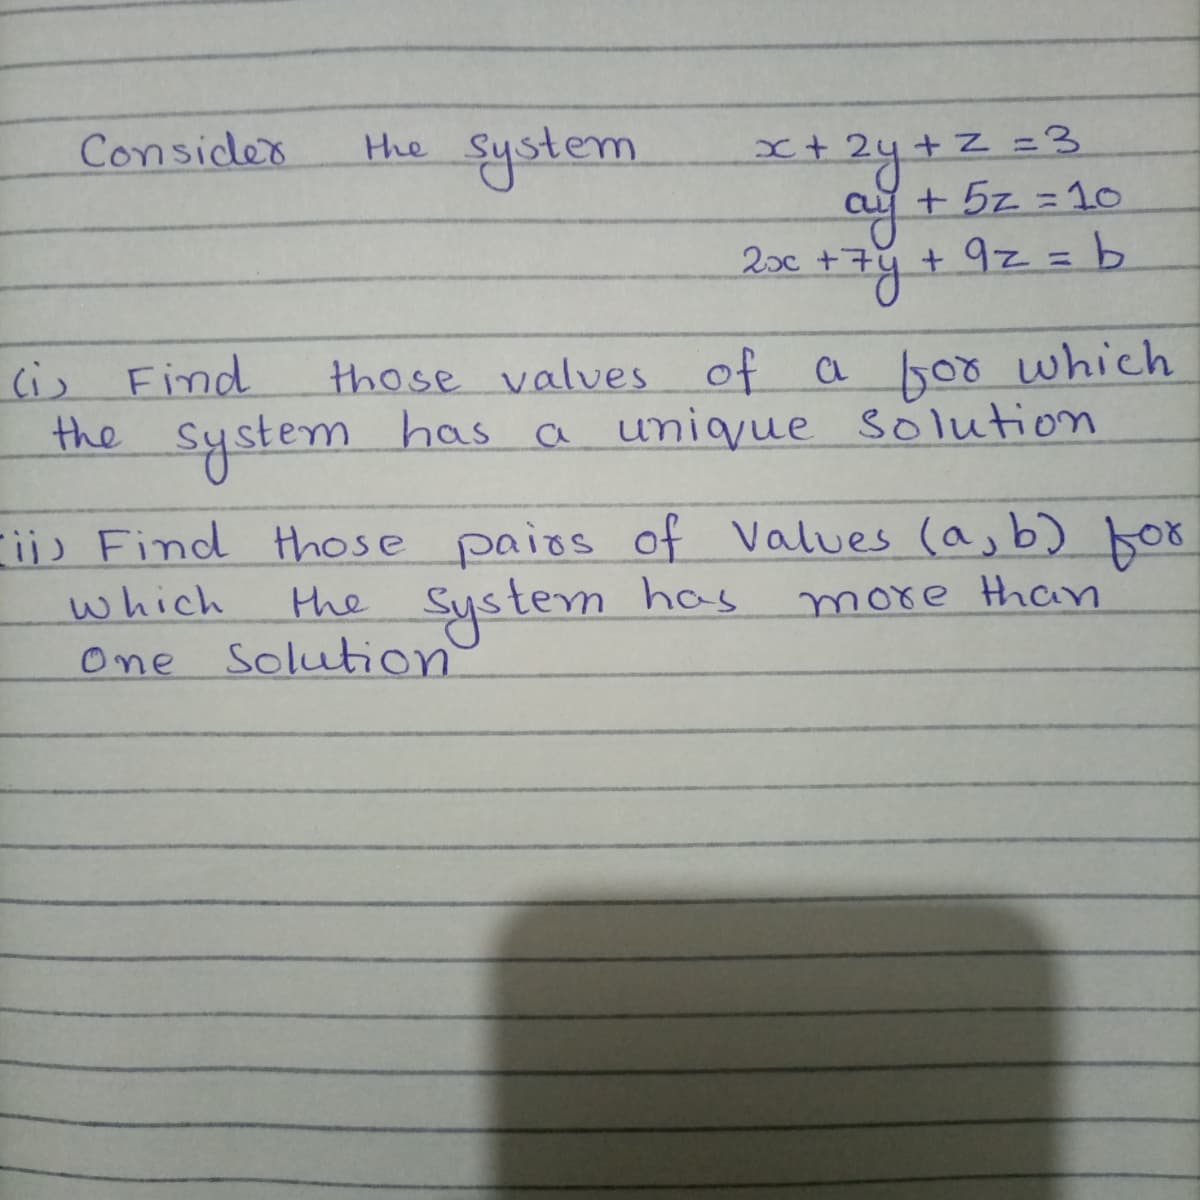 Consider
Hhe System
x+zy+z=
+ 5z =10
+N=3
20c
Cis Find
those valves of a sor which
the
system has a unique solution
F;) Find those paios of Values (a, b) bor
the System has
which
more than
One Solution
